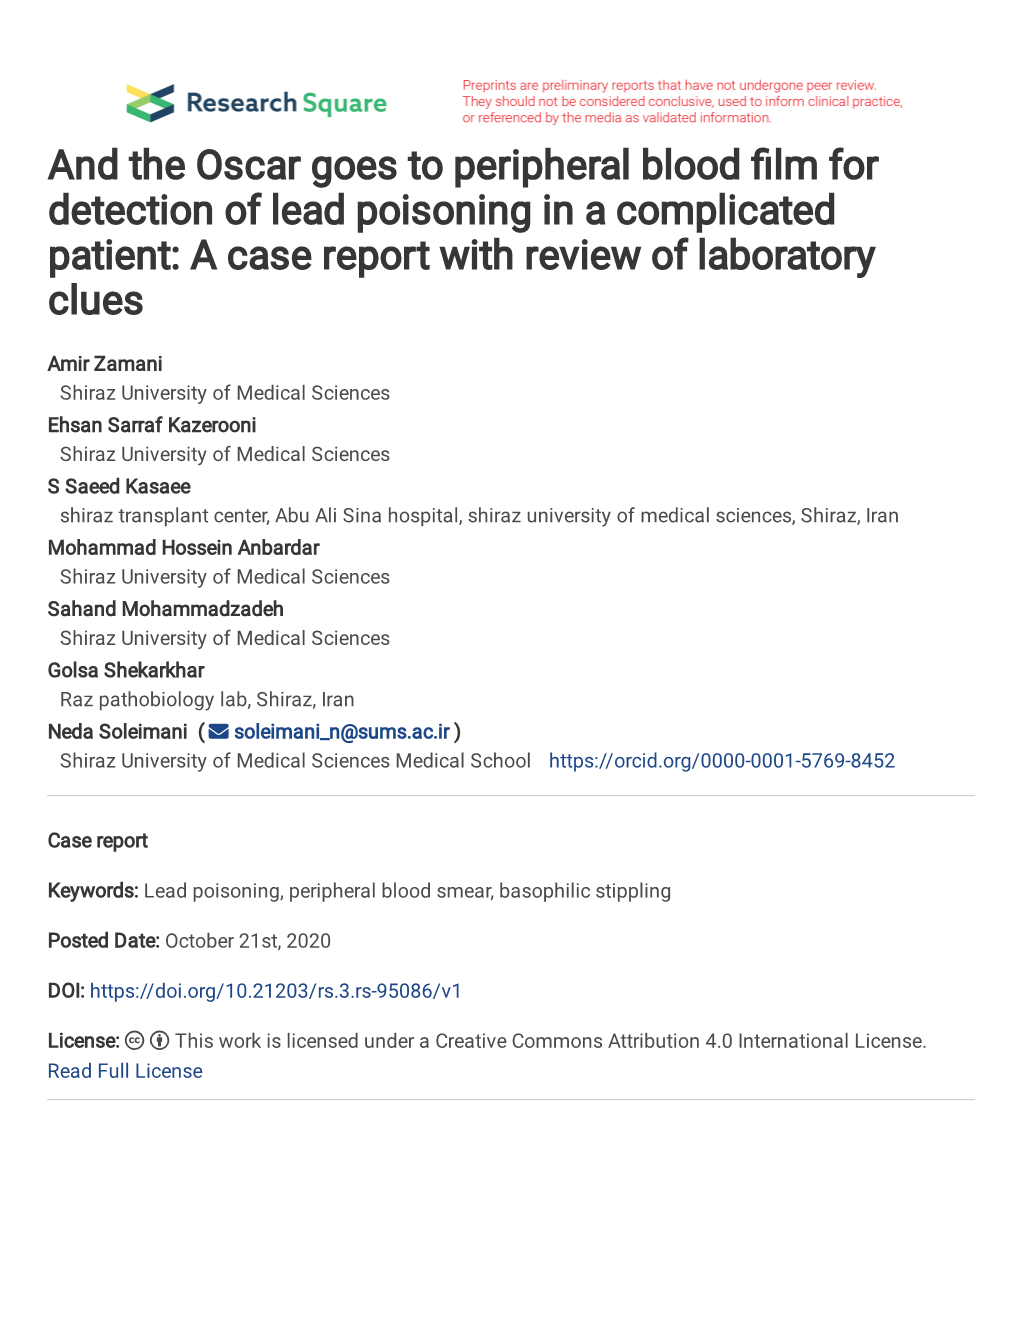 And the Oscar Goes to Peripheral Blood Film for Detection of Lead Poisoning in a Complicated Toxic Patient: a Case Report with Review of Laboratory Clues